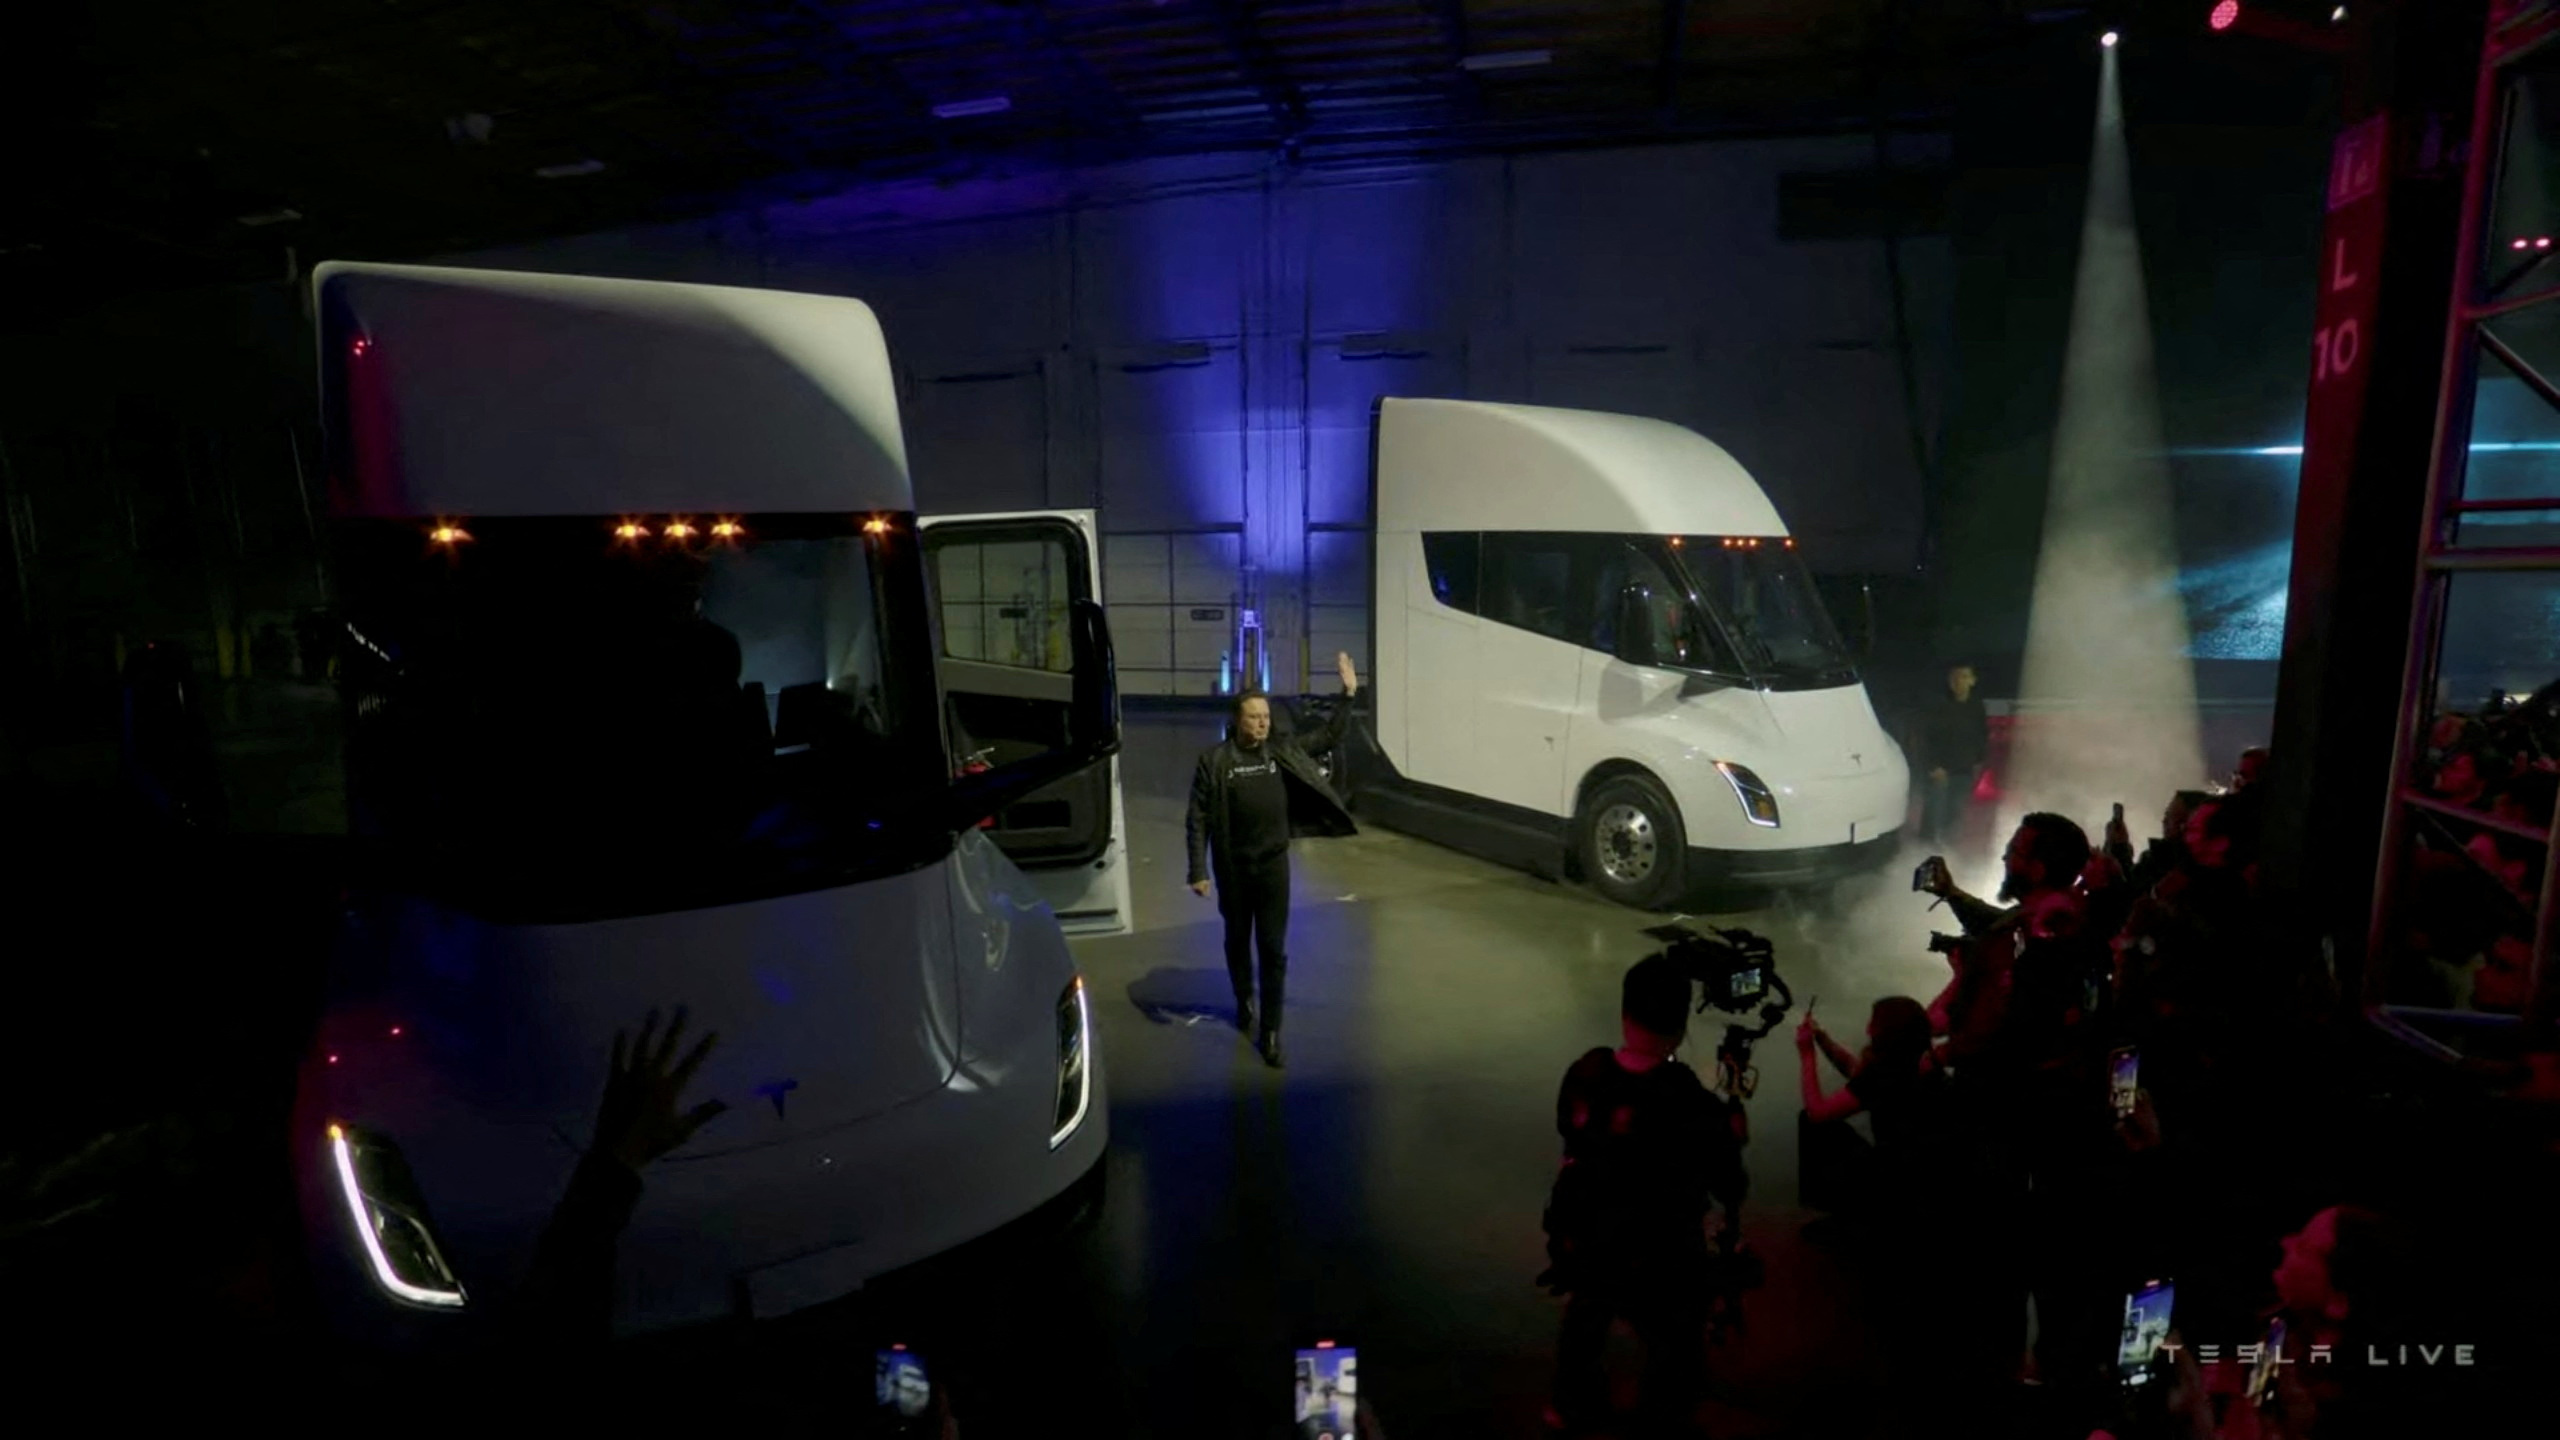 Musk delivers the first Tesla truck, but no update on production, prices